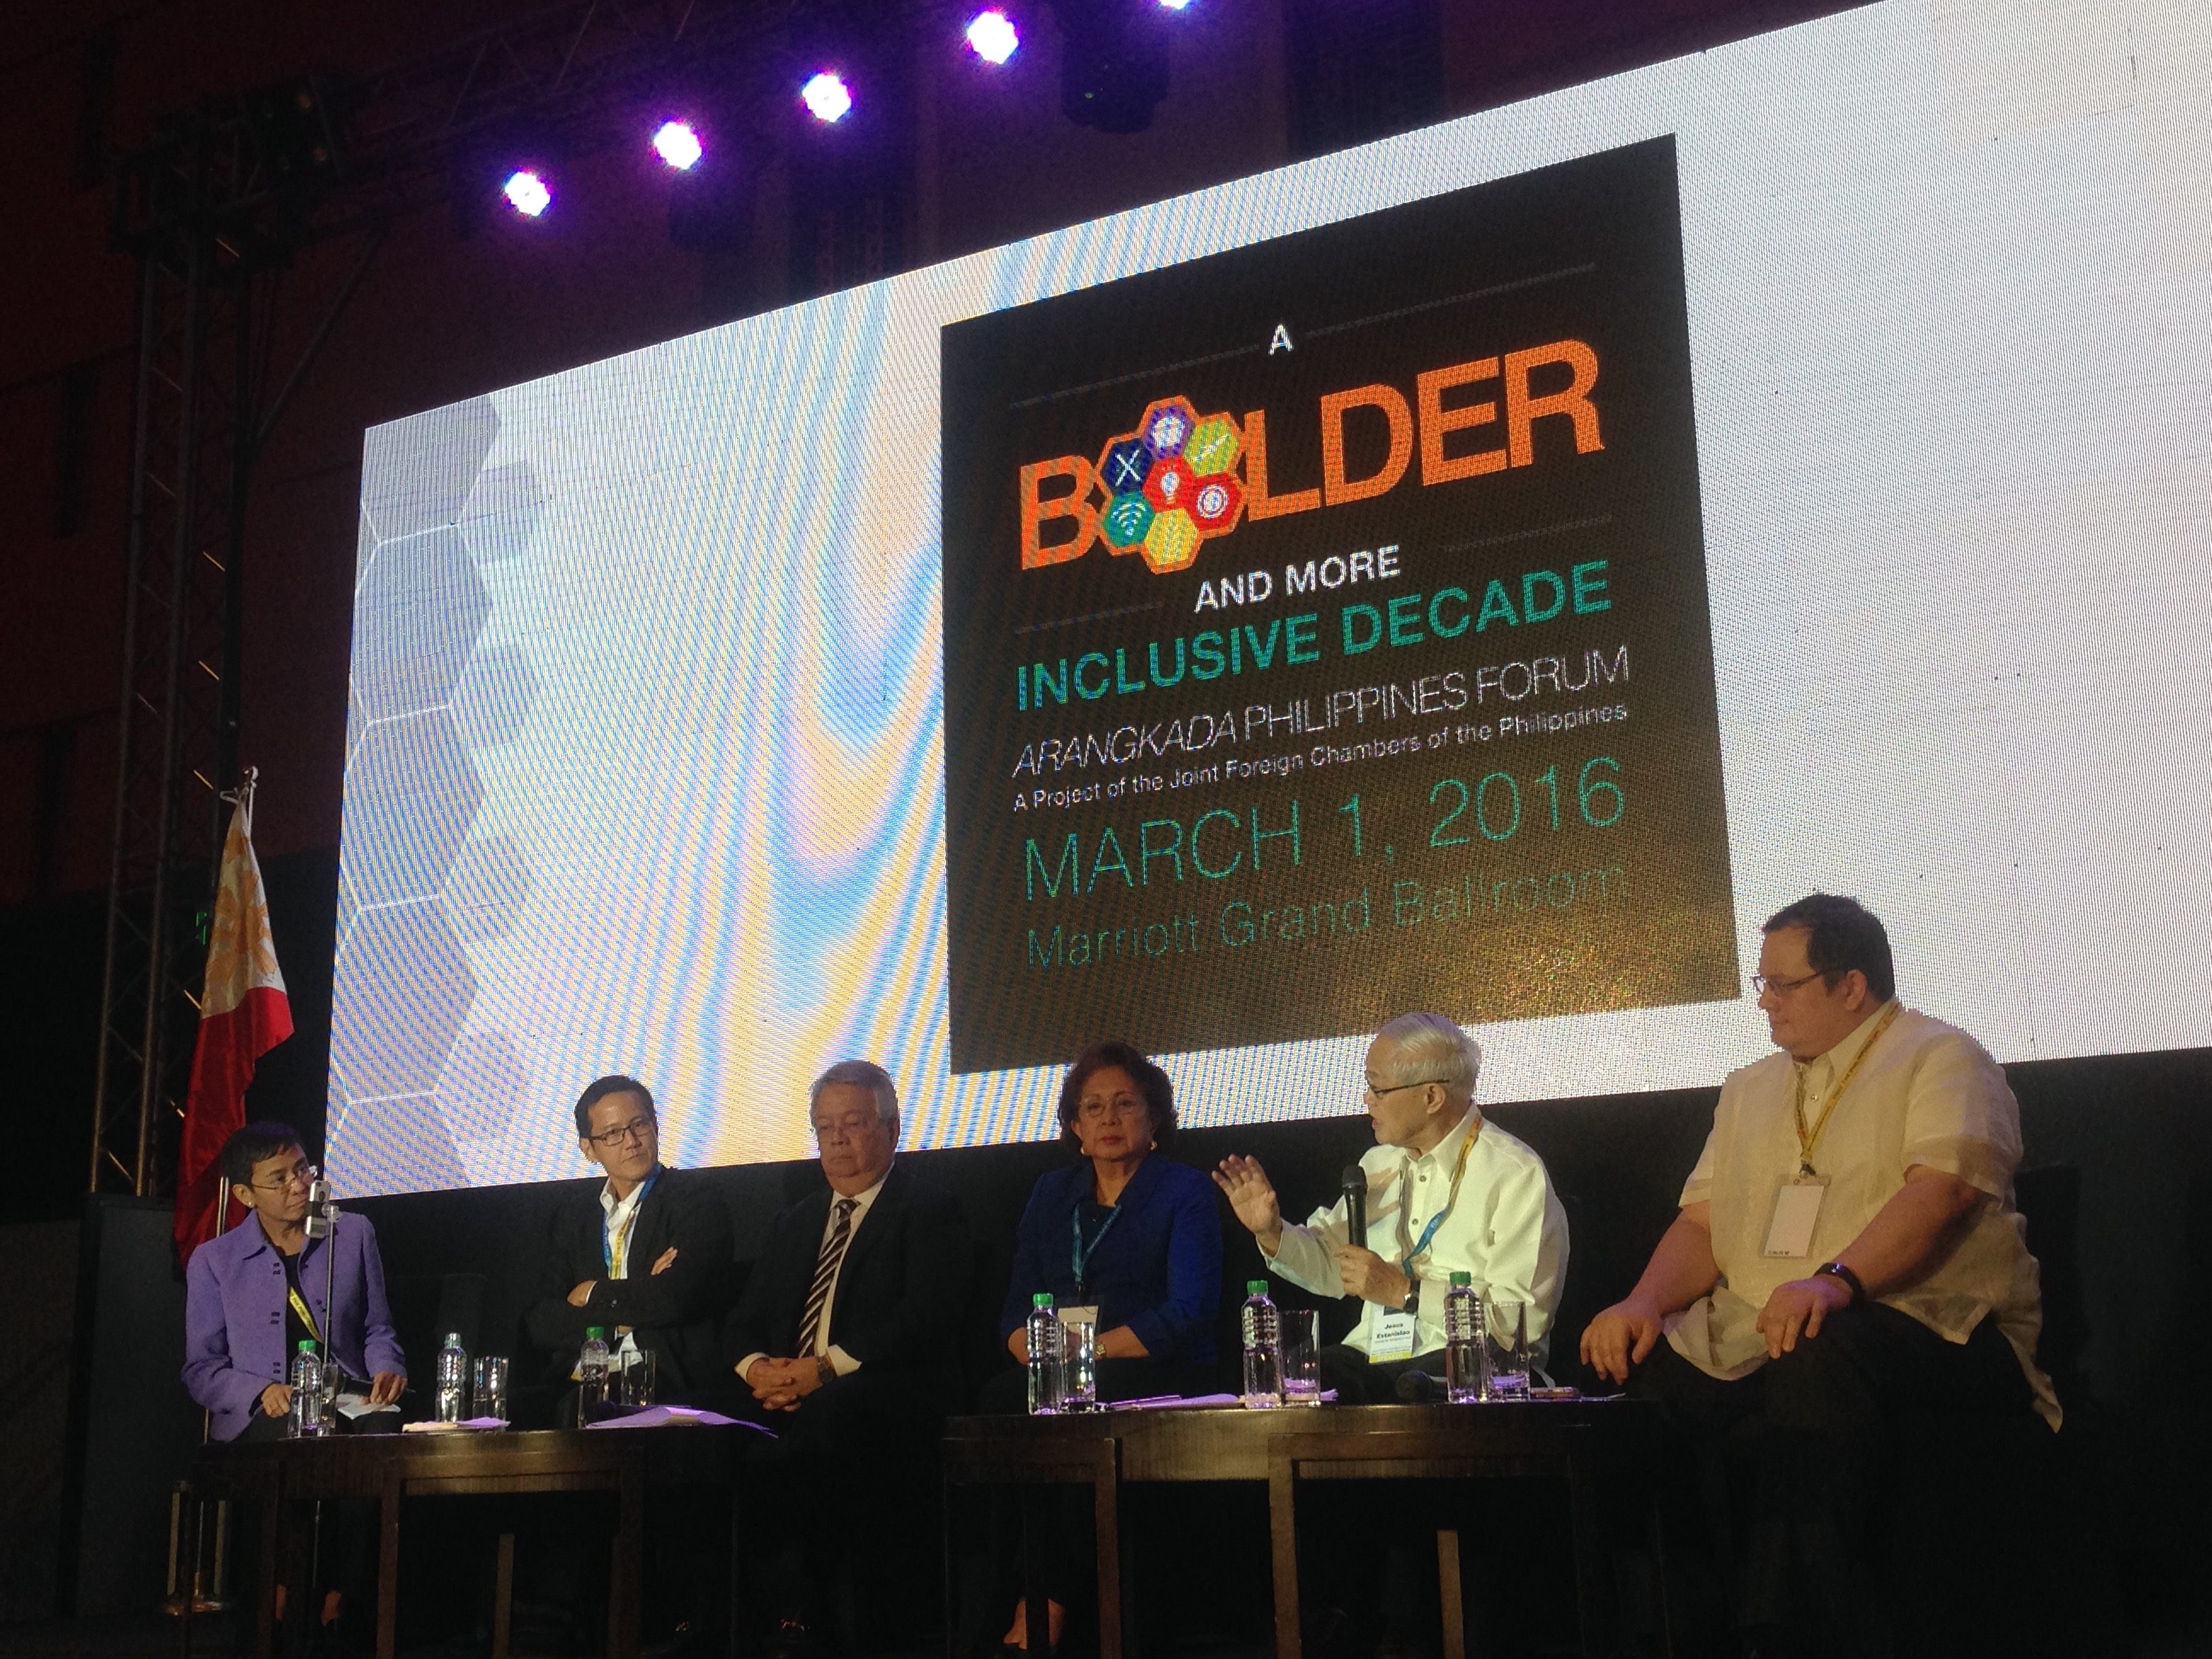 LINGERING ISSUES. JFC says a number of binding constraints still remain, deterring the country's track to achieving inclusive growth. Photo by Chrisee Dela Paz/Rappler  